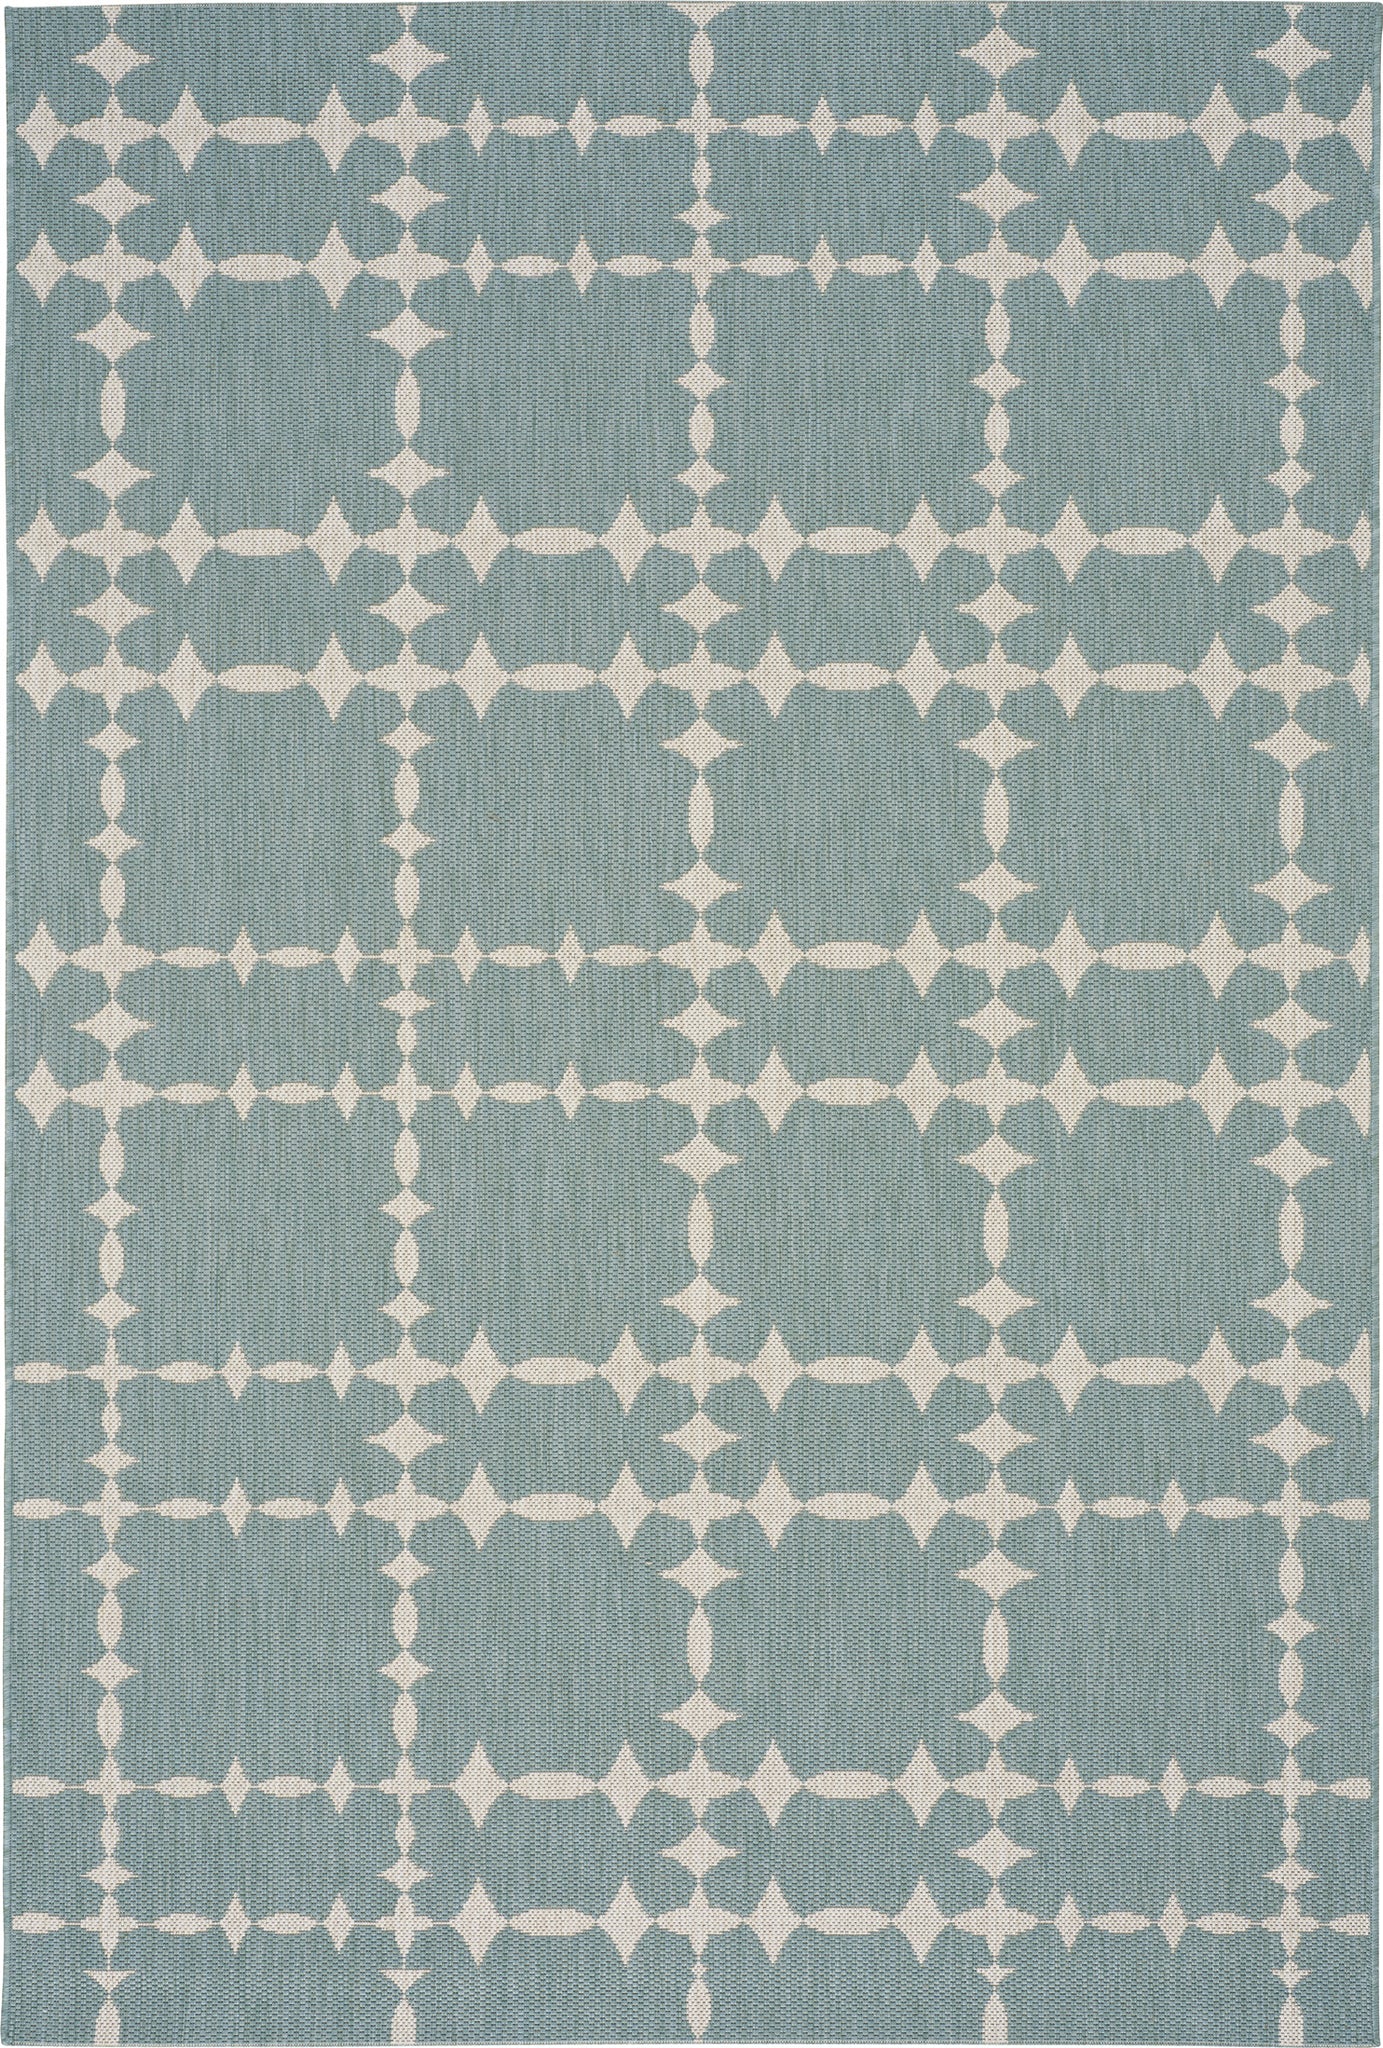 Capel COCOCOZY Elsinore-Tower Court 4738 Blue Area Rug main image